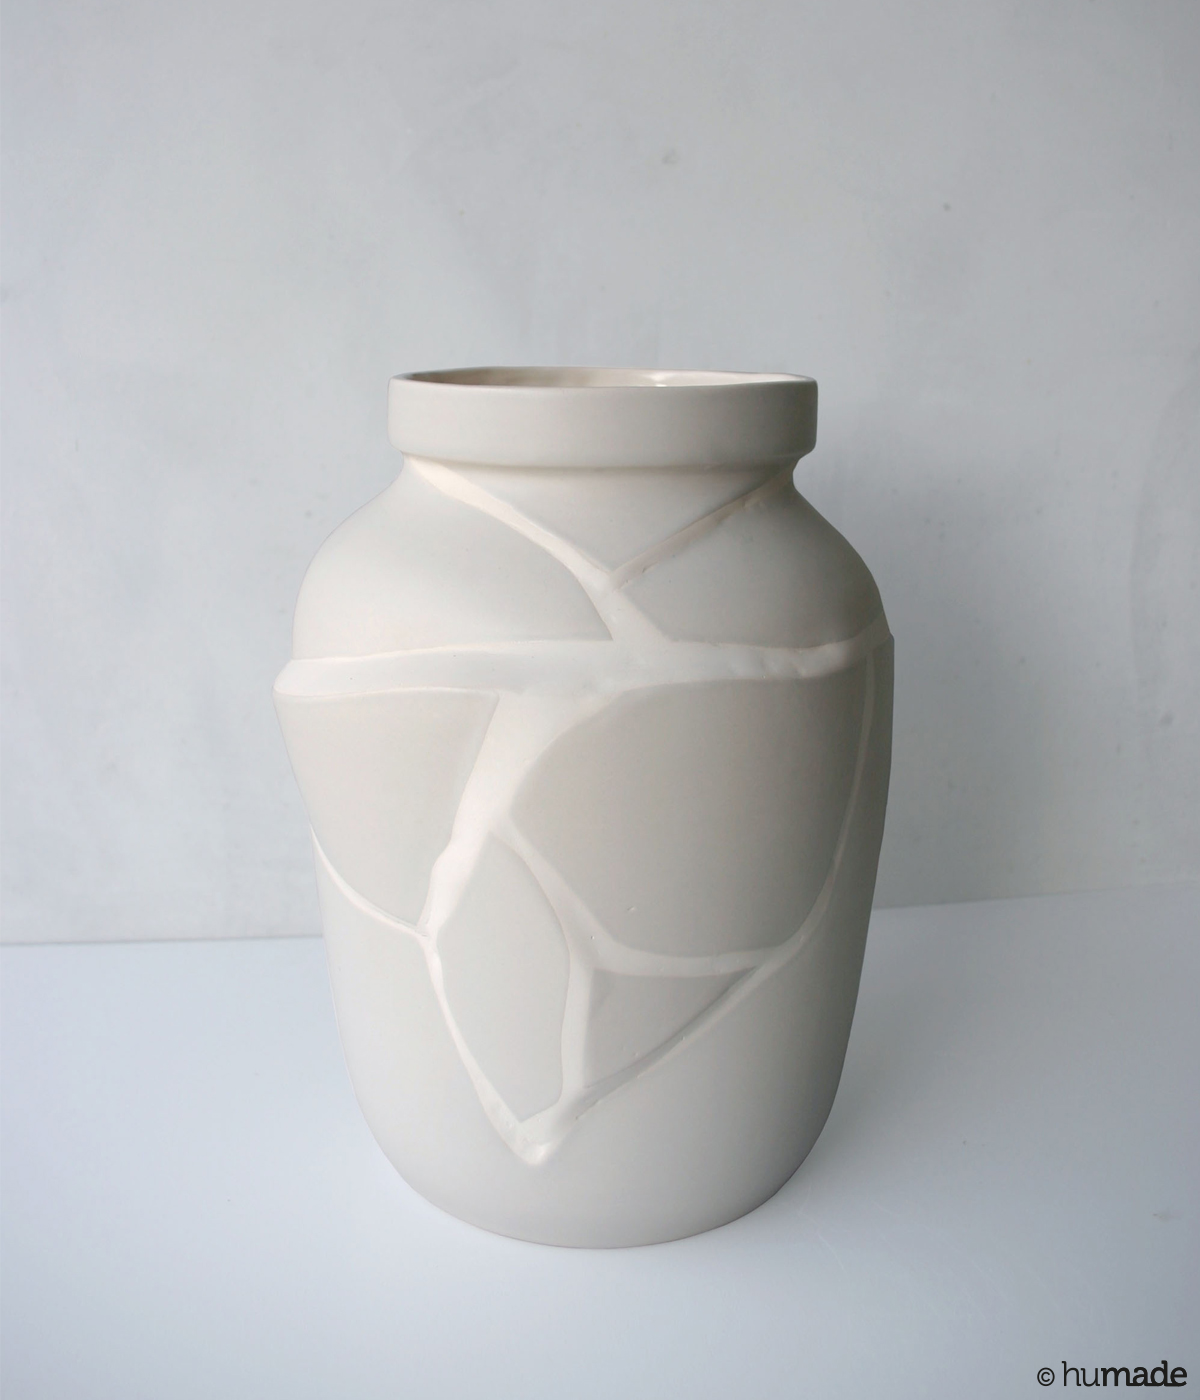 Tectonic vase / earthenware - The tectonic vase invites you to look at change differently.
Just like shifts in the earth&rsquo;s c...